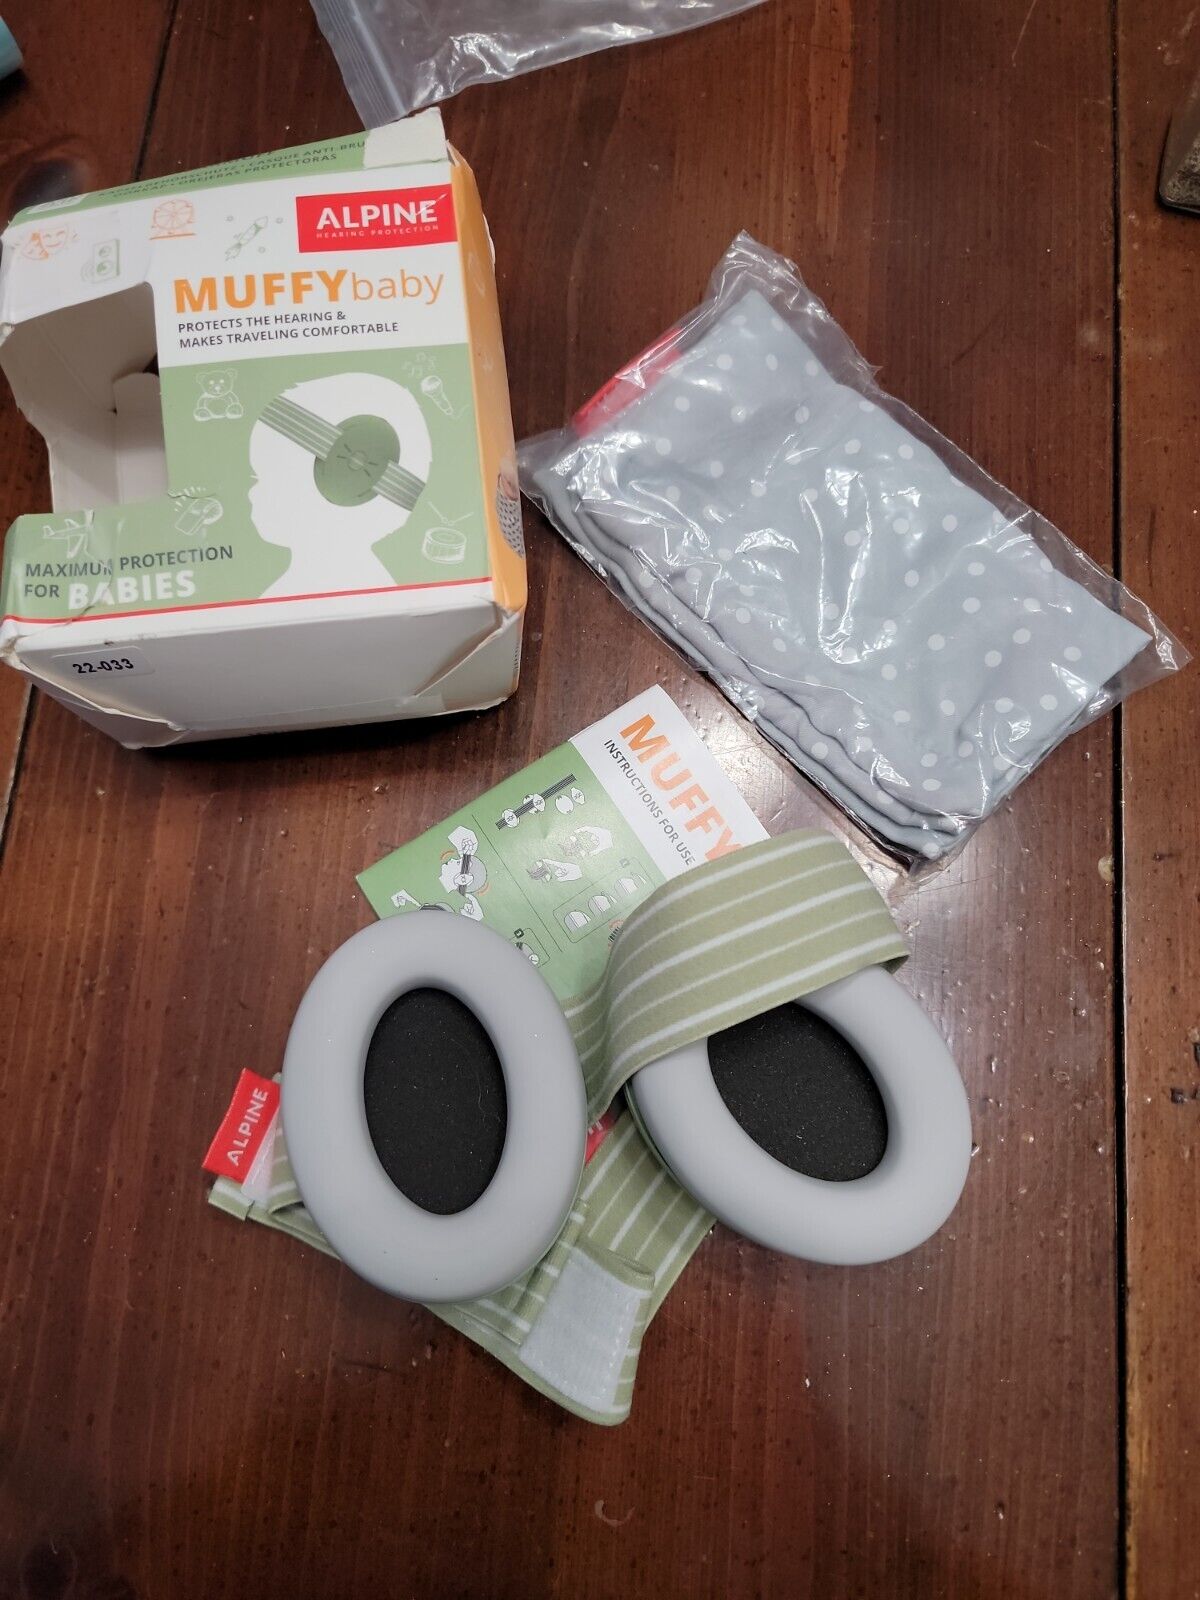 Alpine Muffy Baby Ear Protection For Babies And Toddlers Up To 36 Months